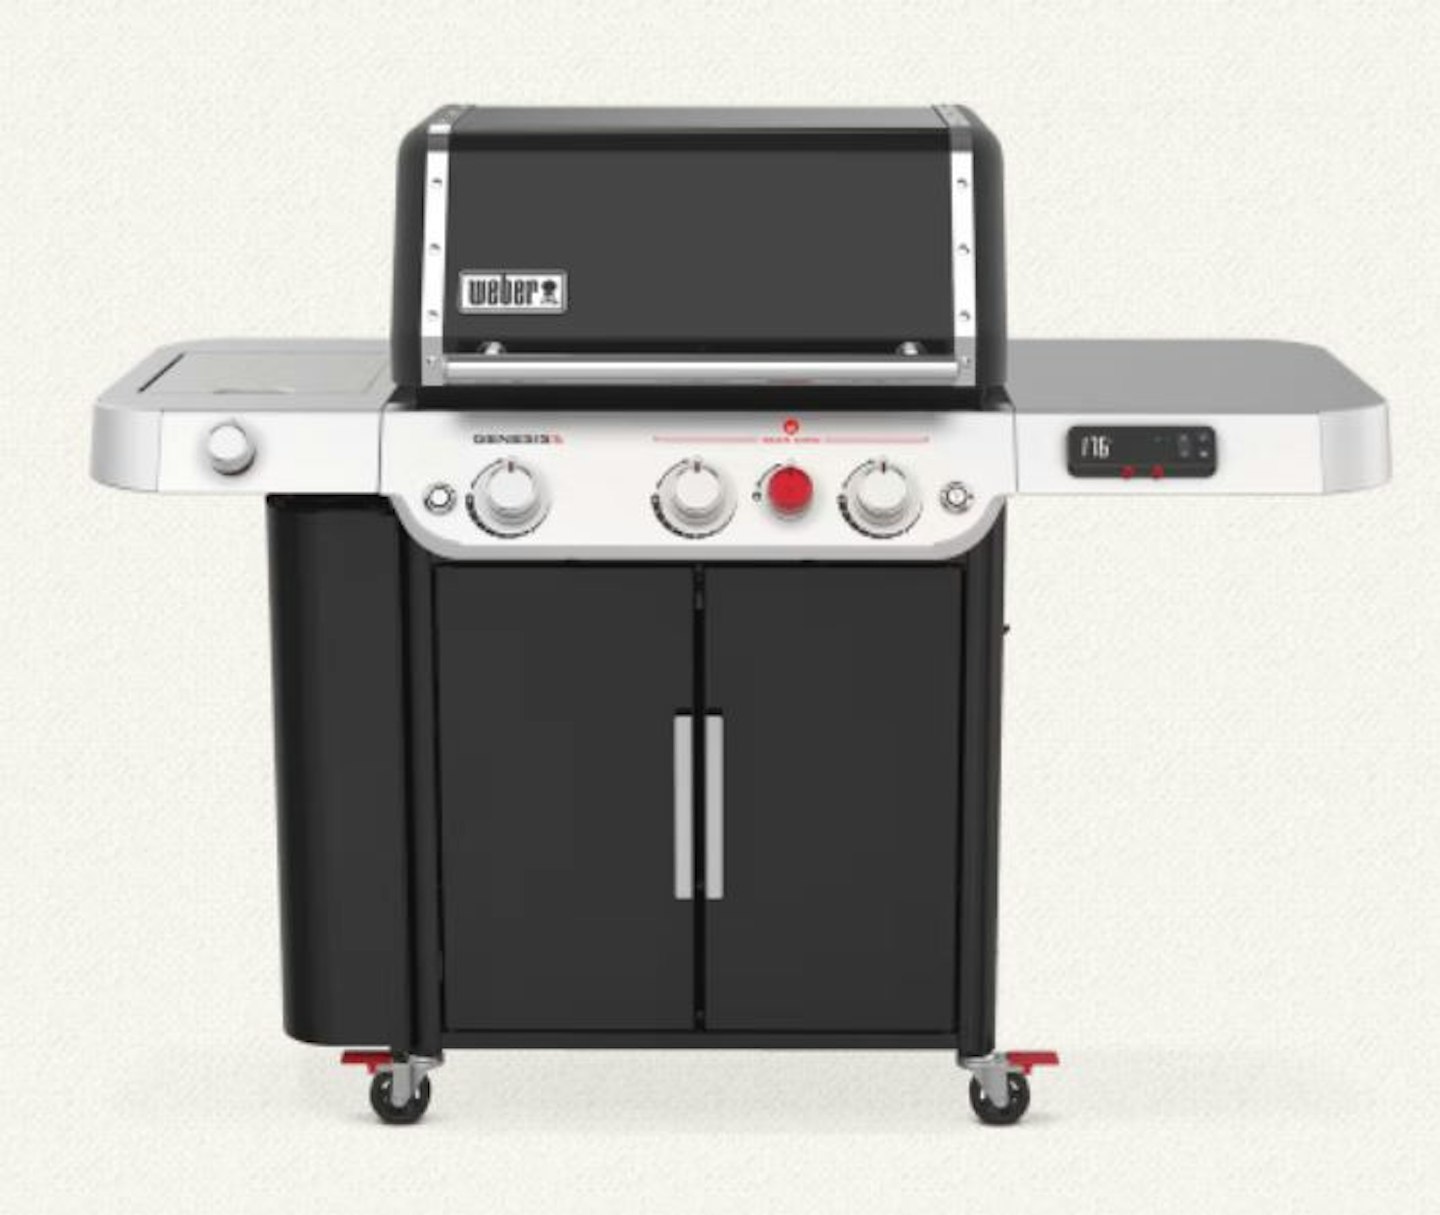 Weber Genesis EPX-335 Smart Gas Barbecue